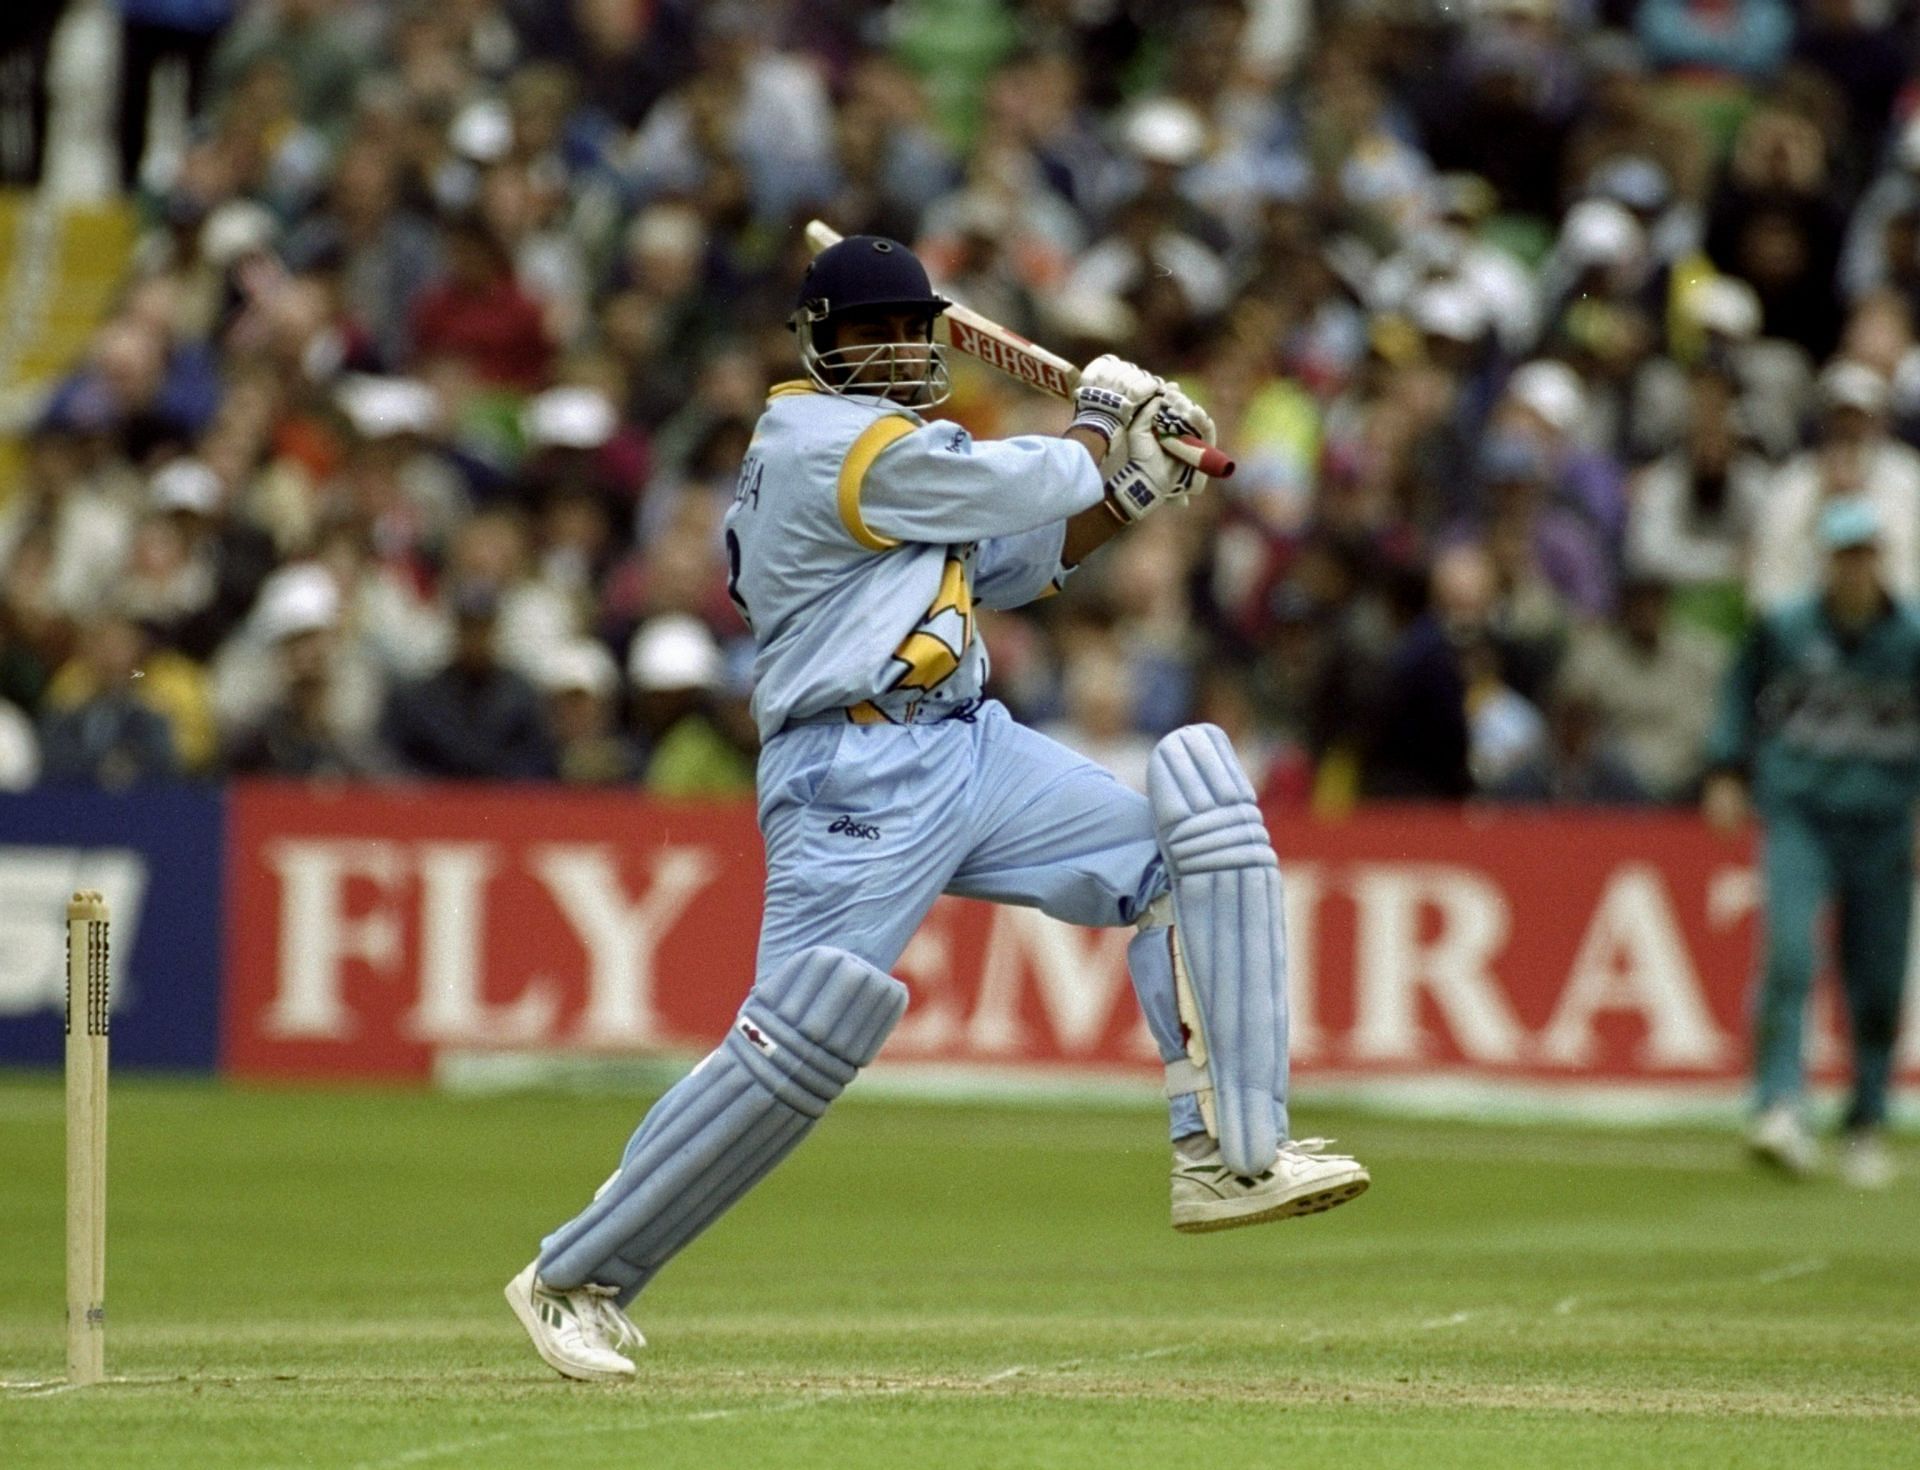 Ajay Jadeja was a plucky middle-order batter for India